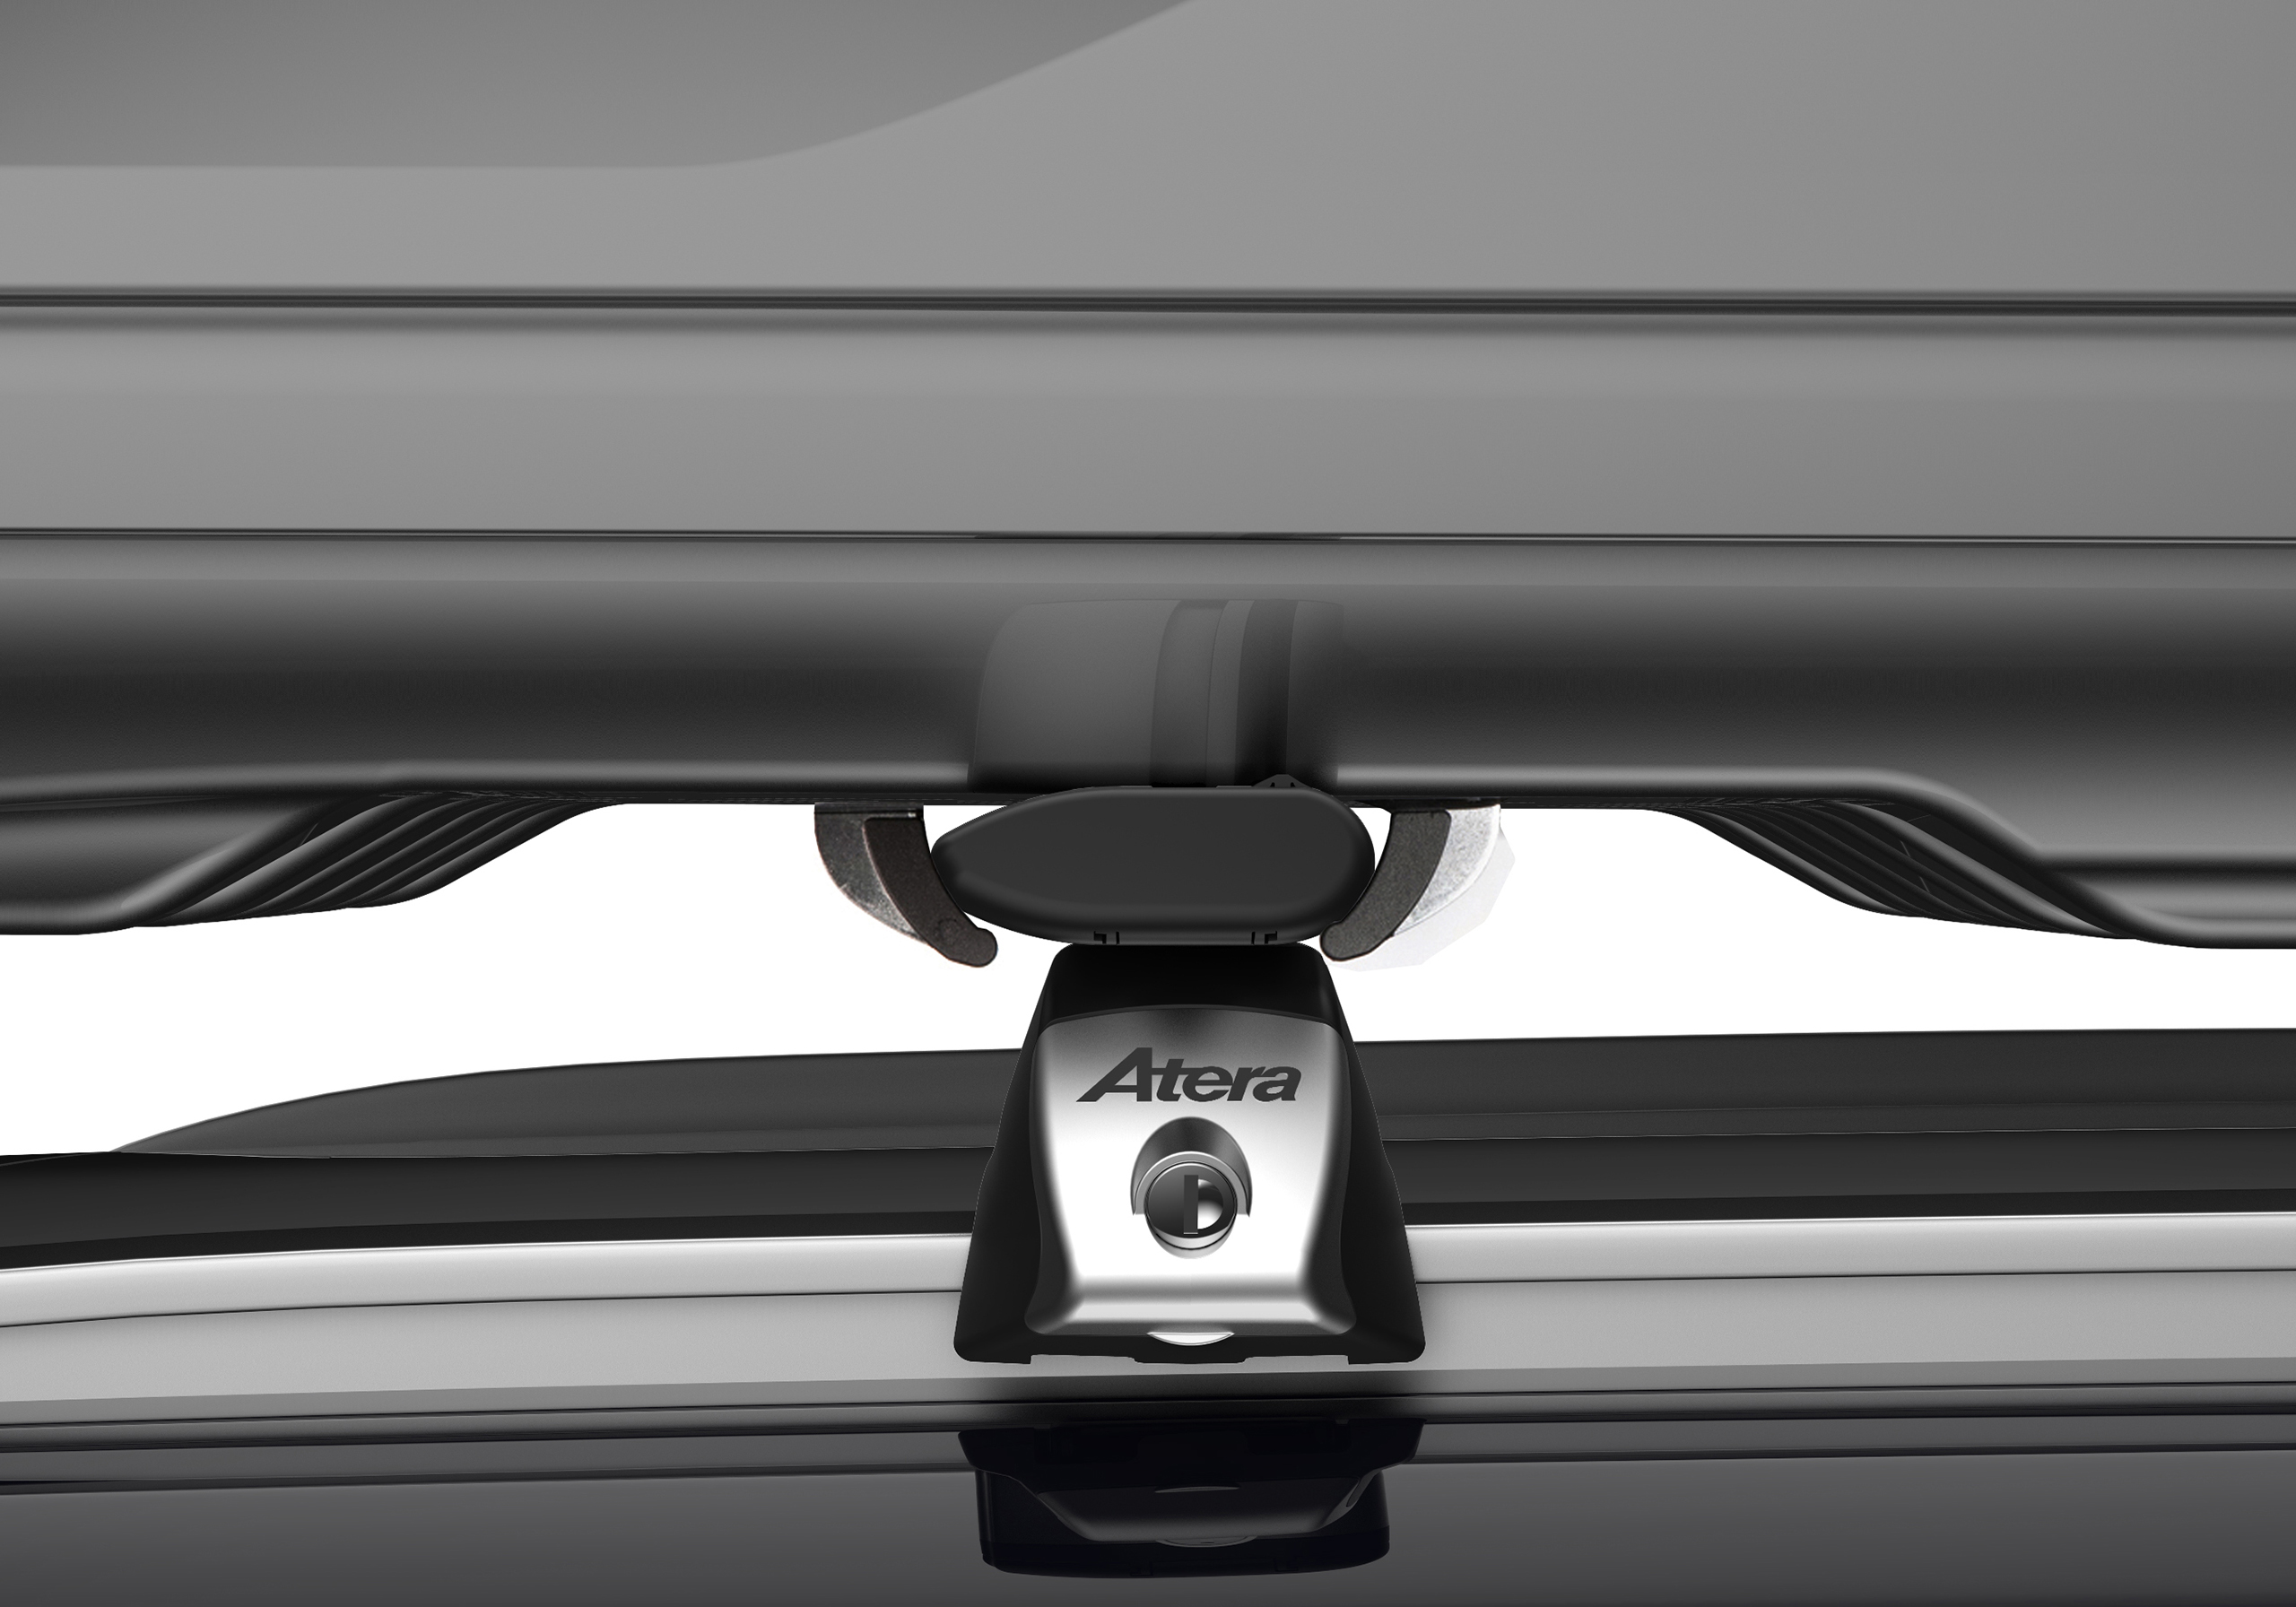 Package deal: Atera Casar L AR2292 roof box, gloss black, and bars